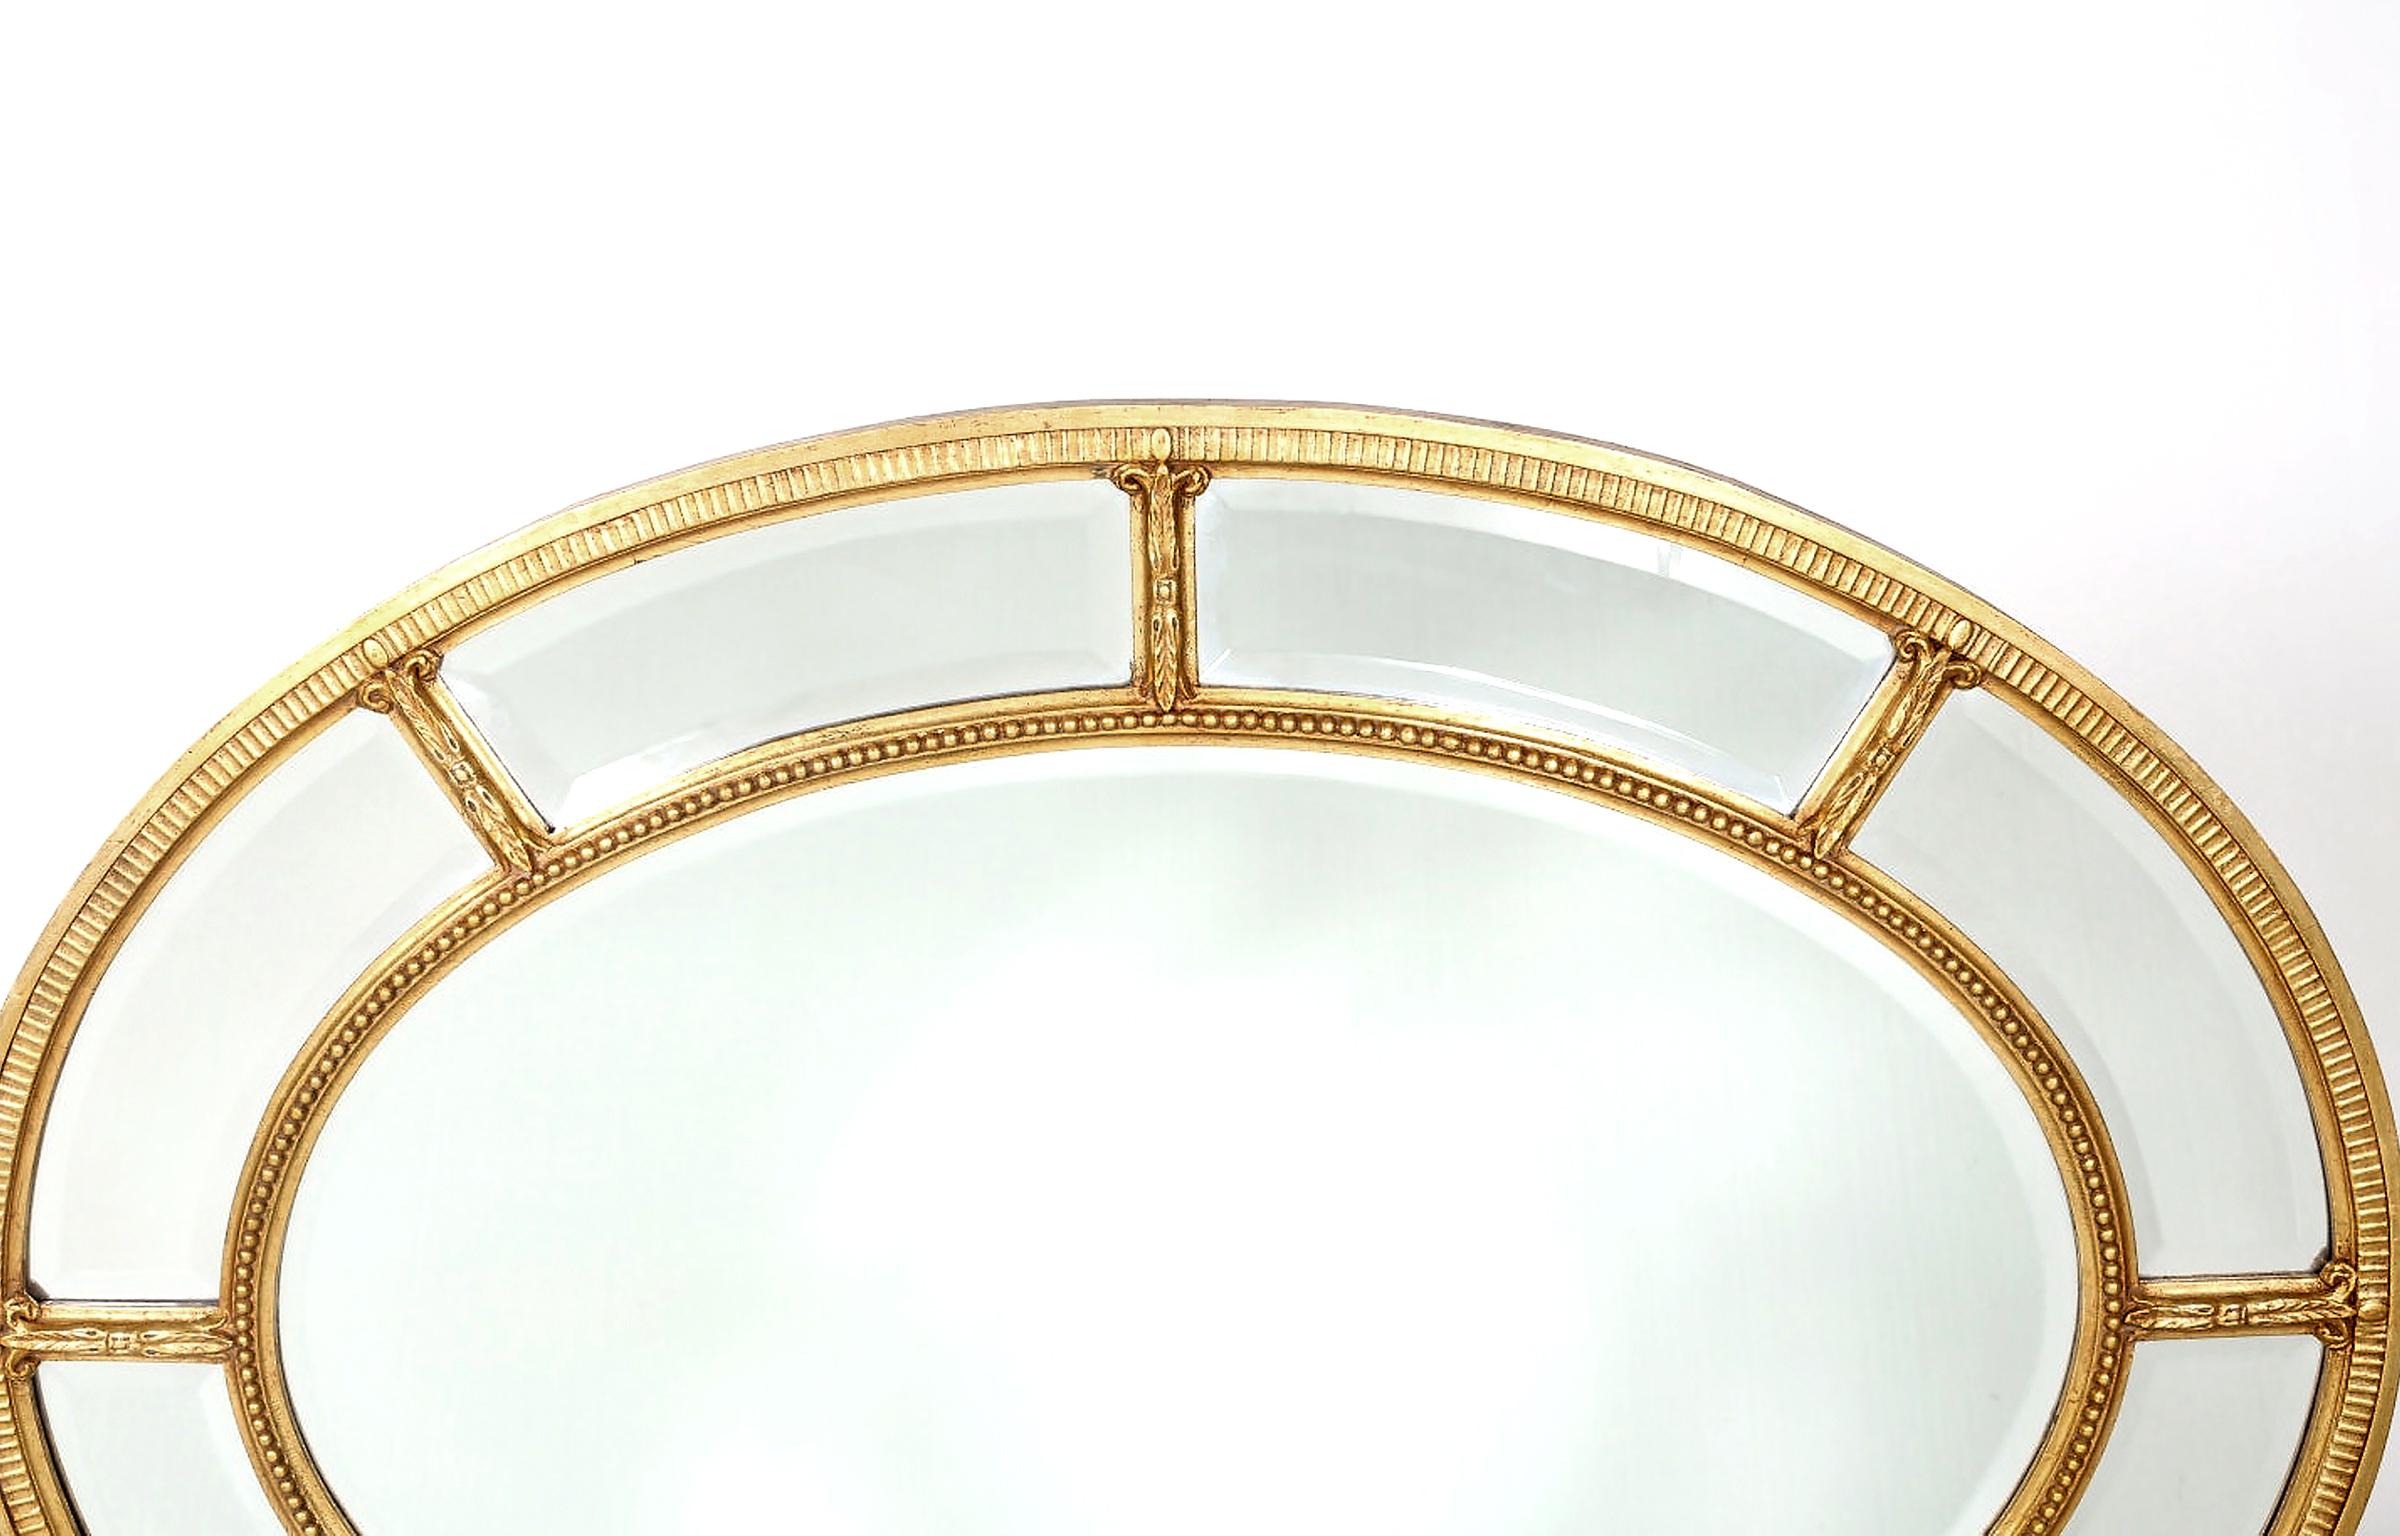 Gilt wood framed oval shape beveled hanging wall mirror . The mirror can be hanged horizontally / Vertically . Minor wear consistent with age / use . The mirror measure about 48 inches Long X 26 inches Wide